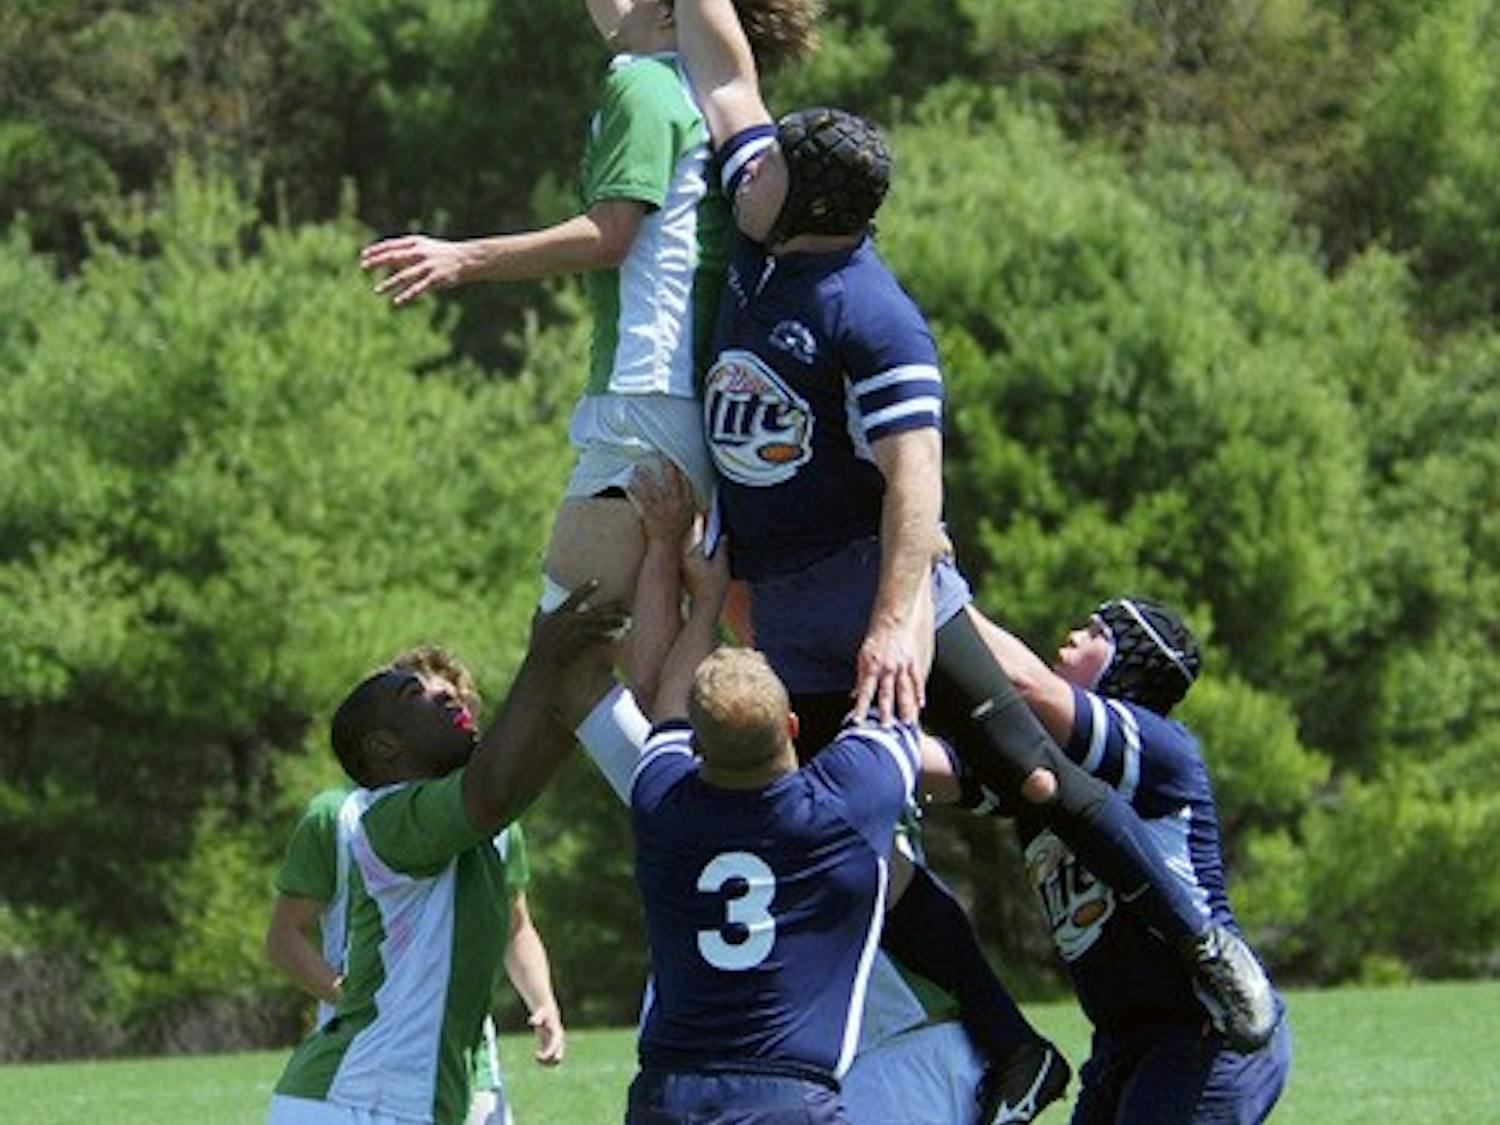 The Big Green grabs control of the ball on a lineout in early season action.